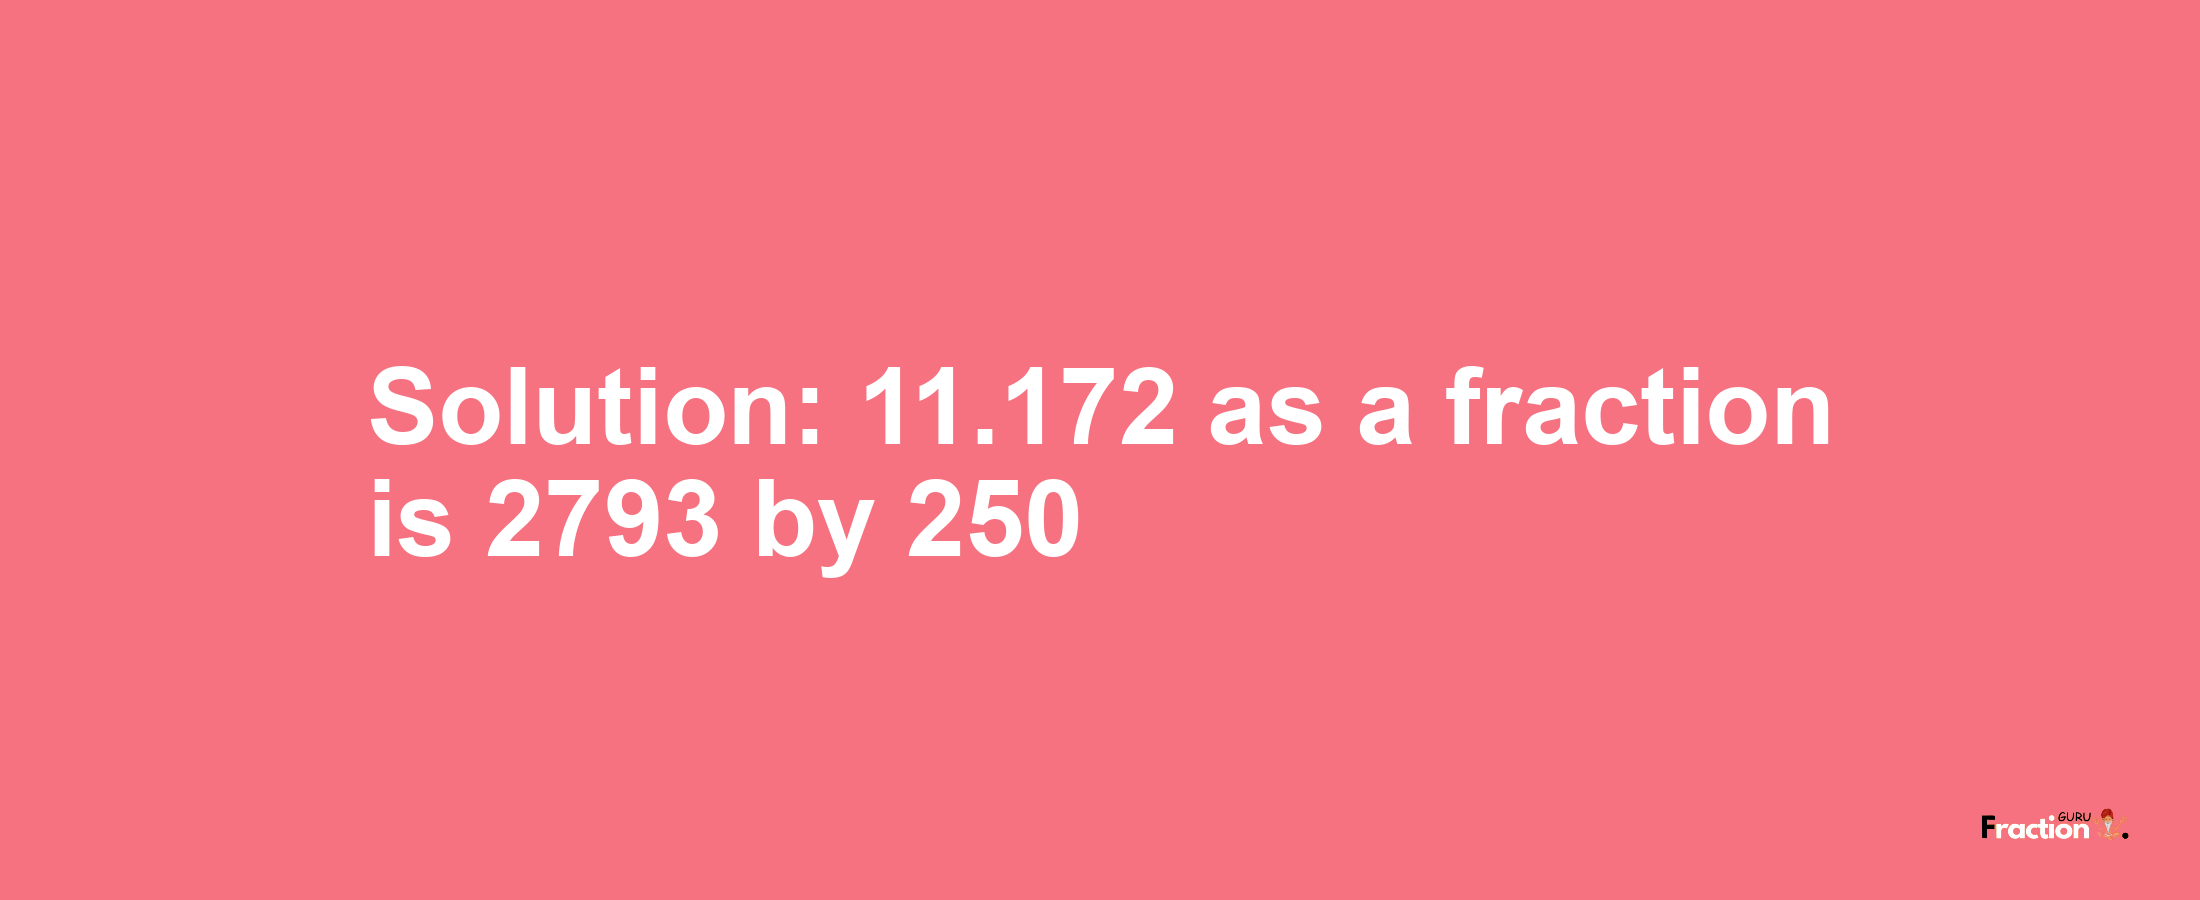 Solution:11.172 as a fraction is 2793/250